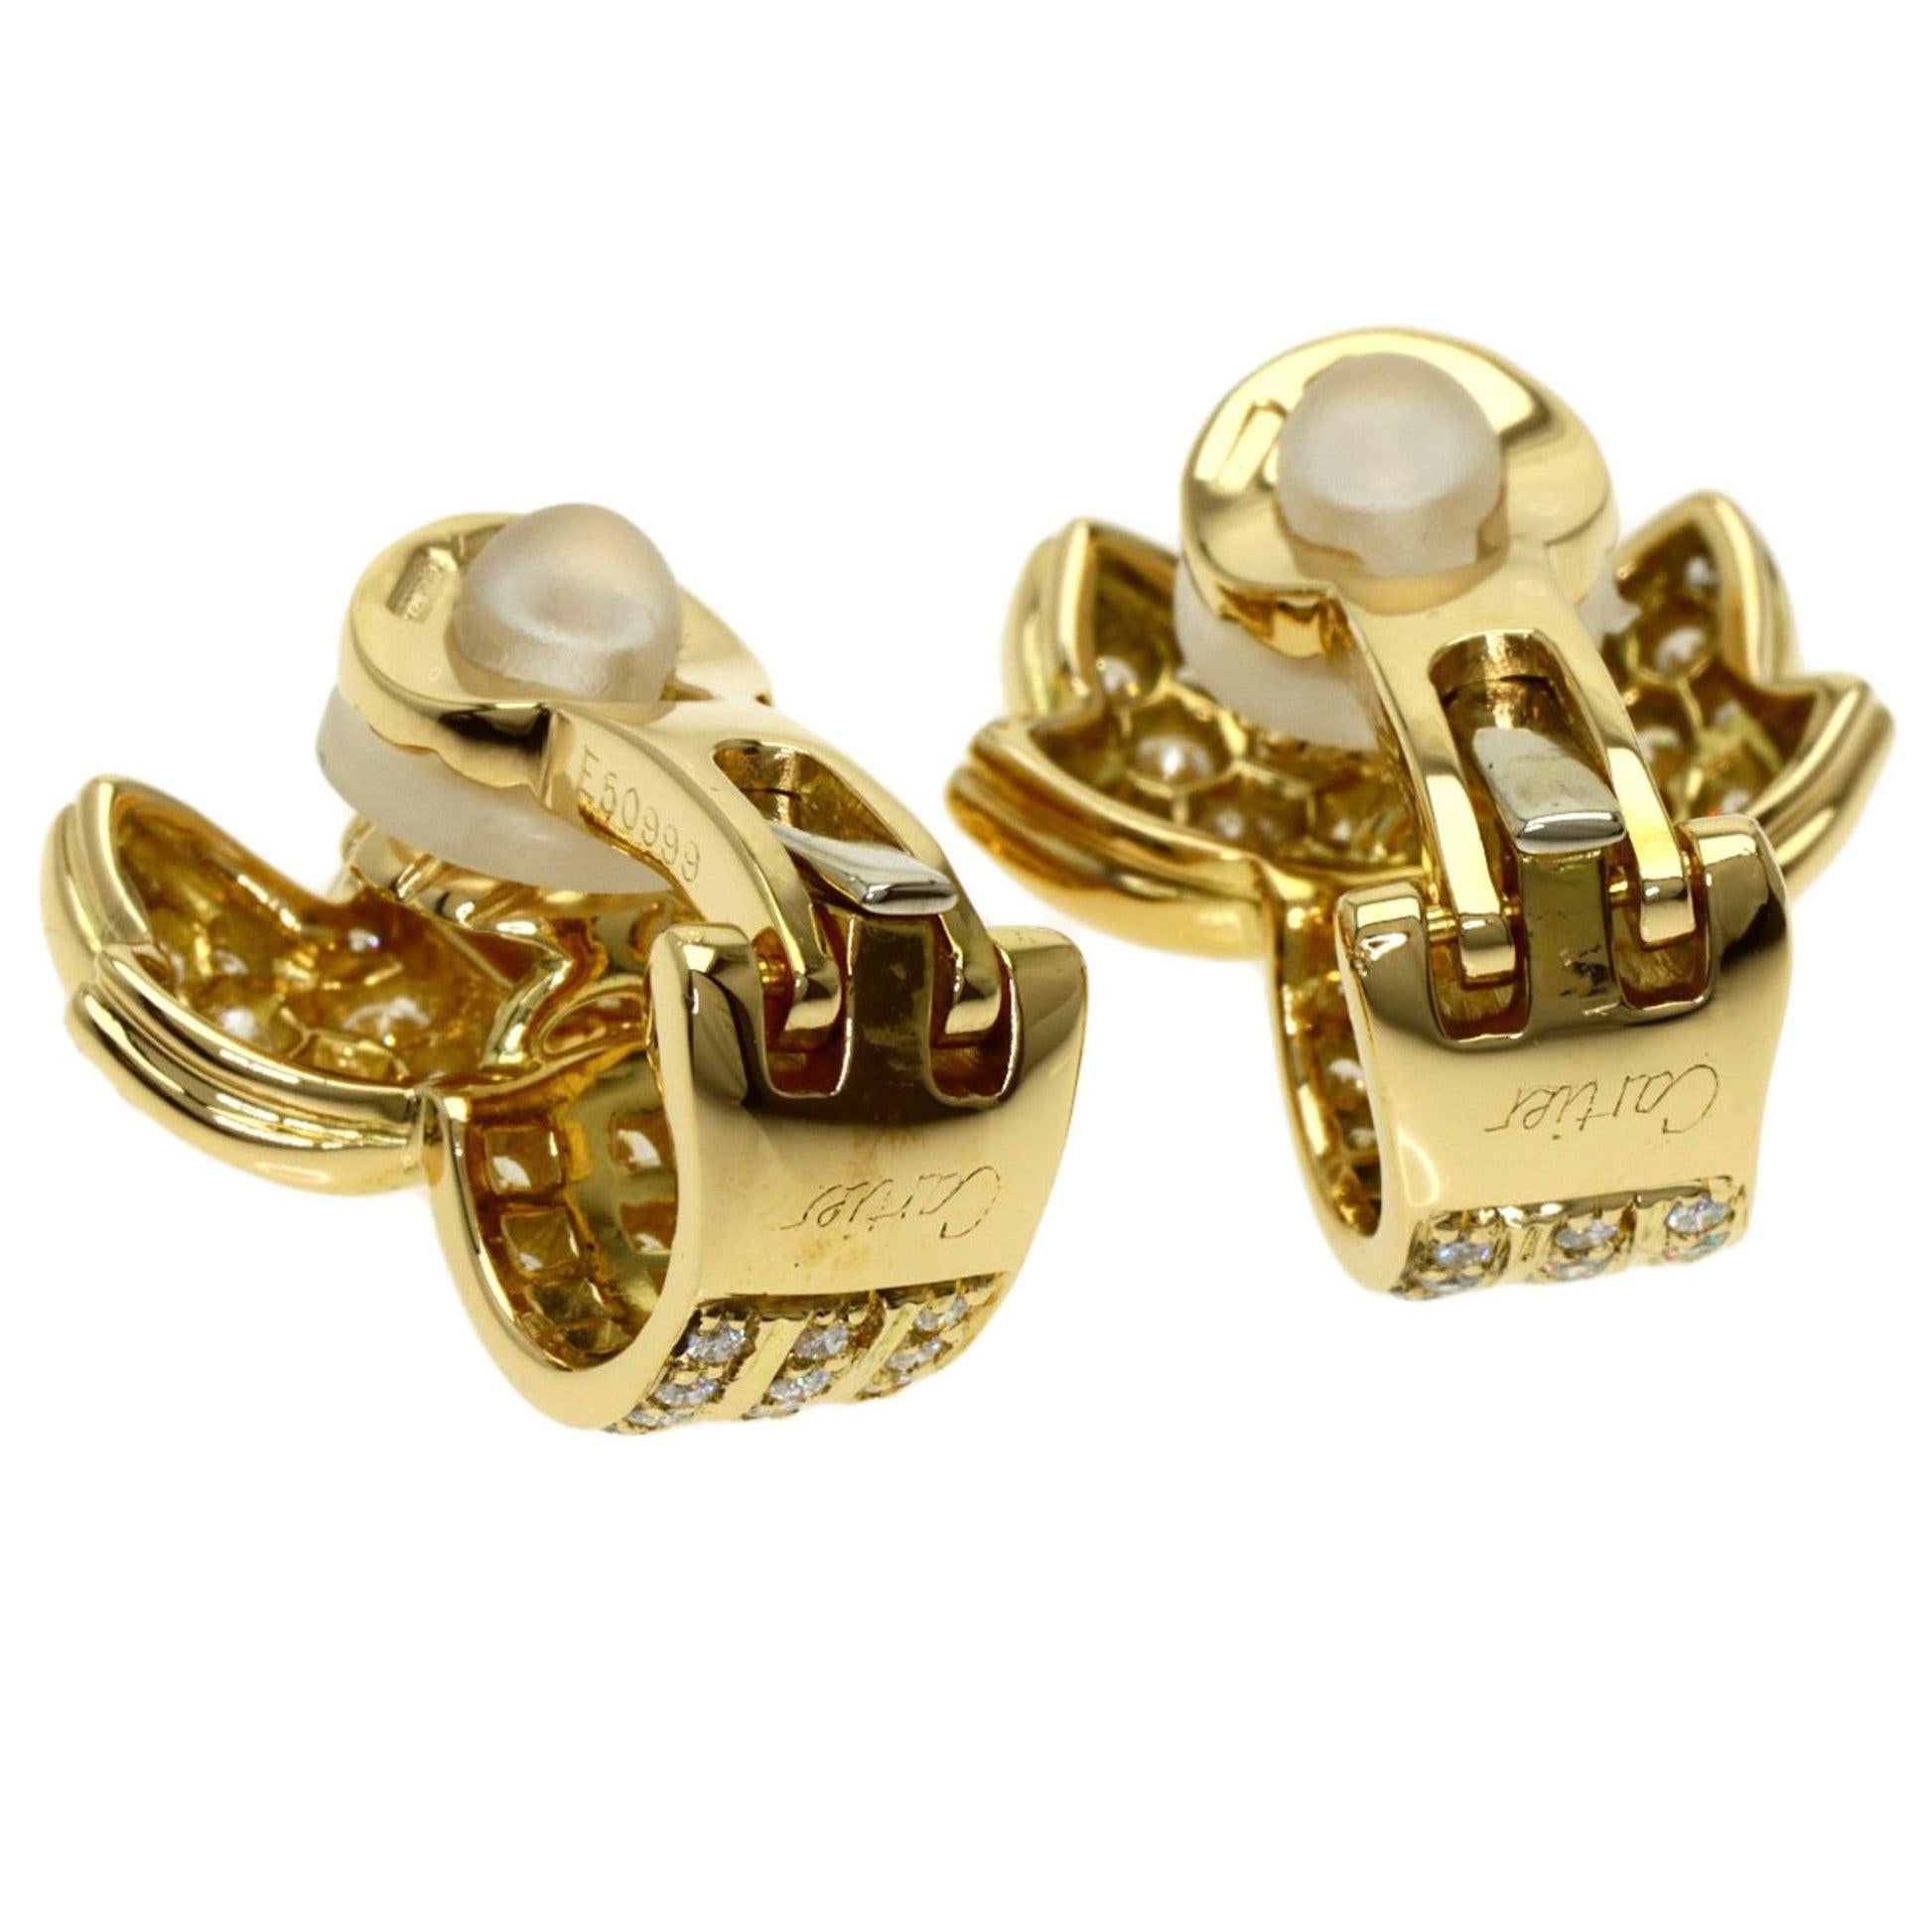 Cartier Diamond Earrings in 18K Yellow Gold

Additional Information:
Brand: Cartier
Gender: Women
Gemstone: Diamond
Earring type: Clip earrings
Material: Yellow gold (18K)
Condition: Good
Condition details: The item has been used and has some minor